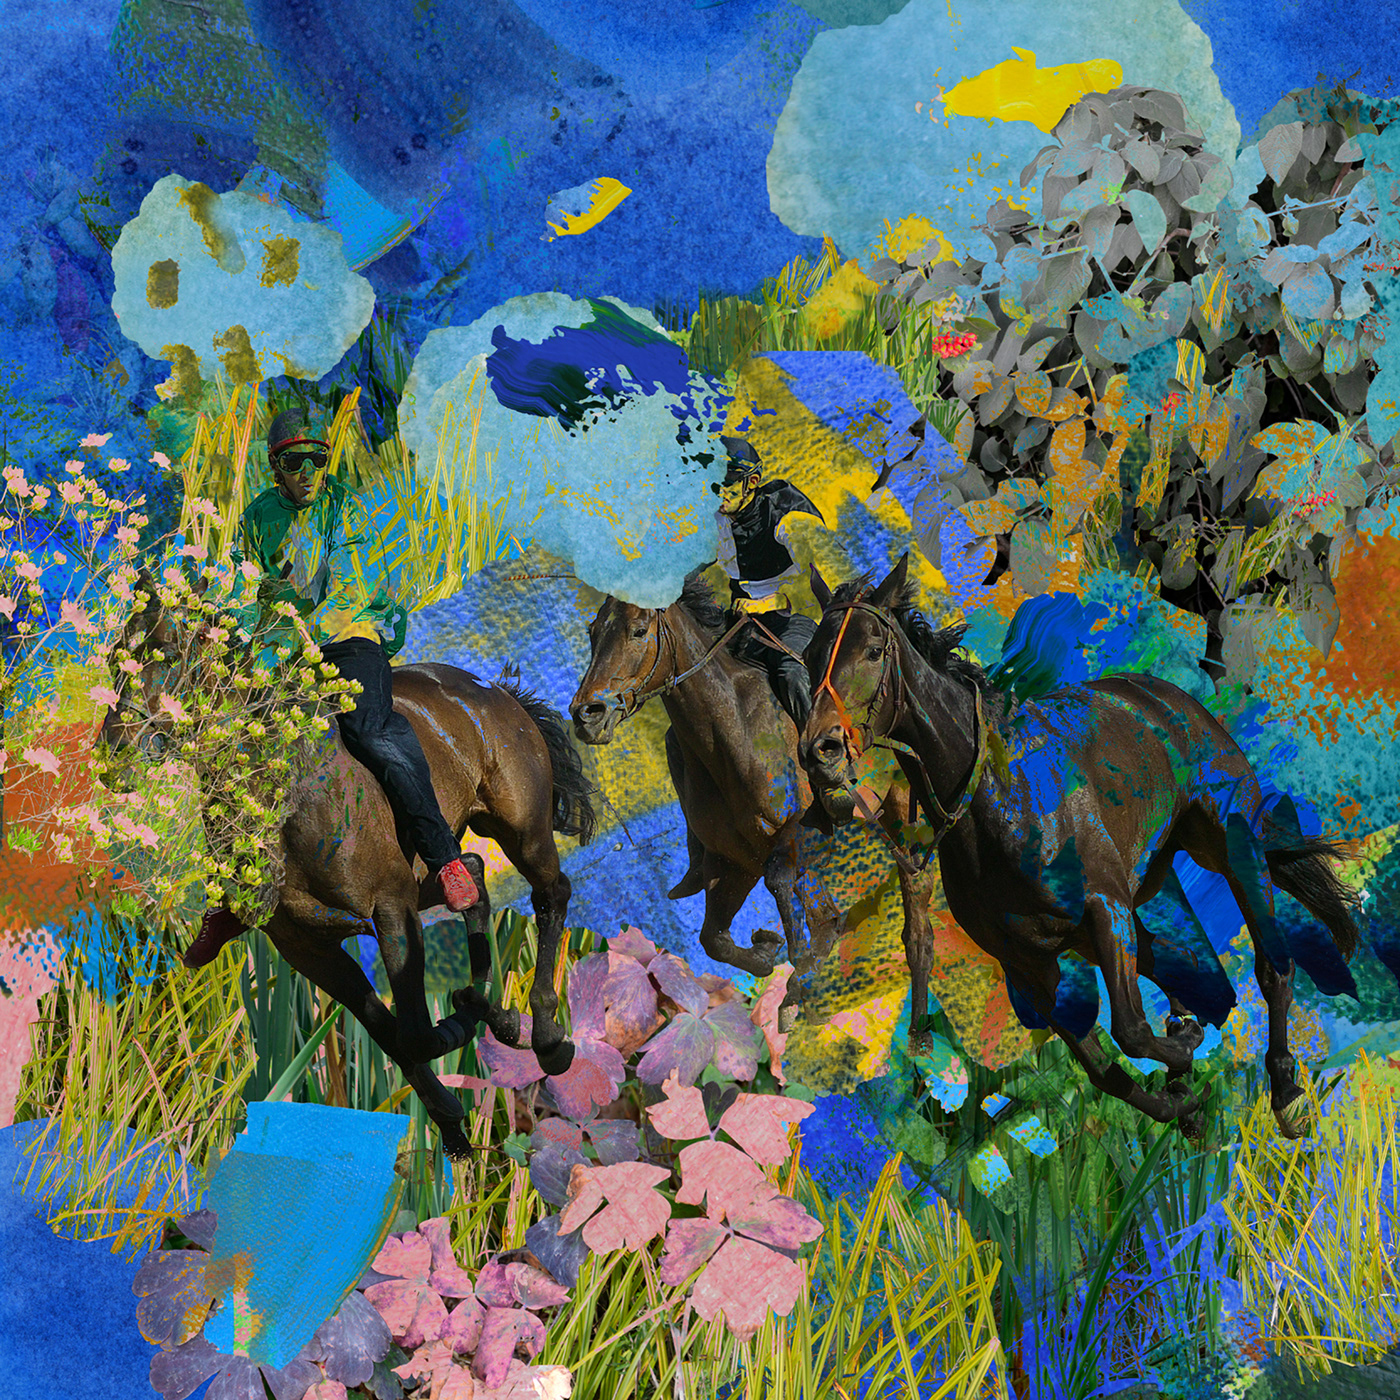 Digital Collage photomontage Digital Art  blue yellow figures and landscapes race horses